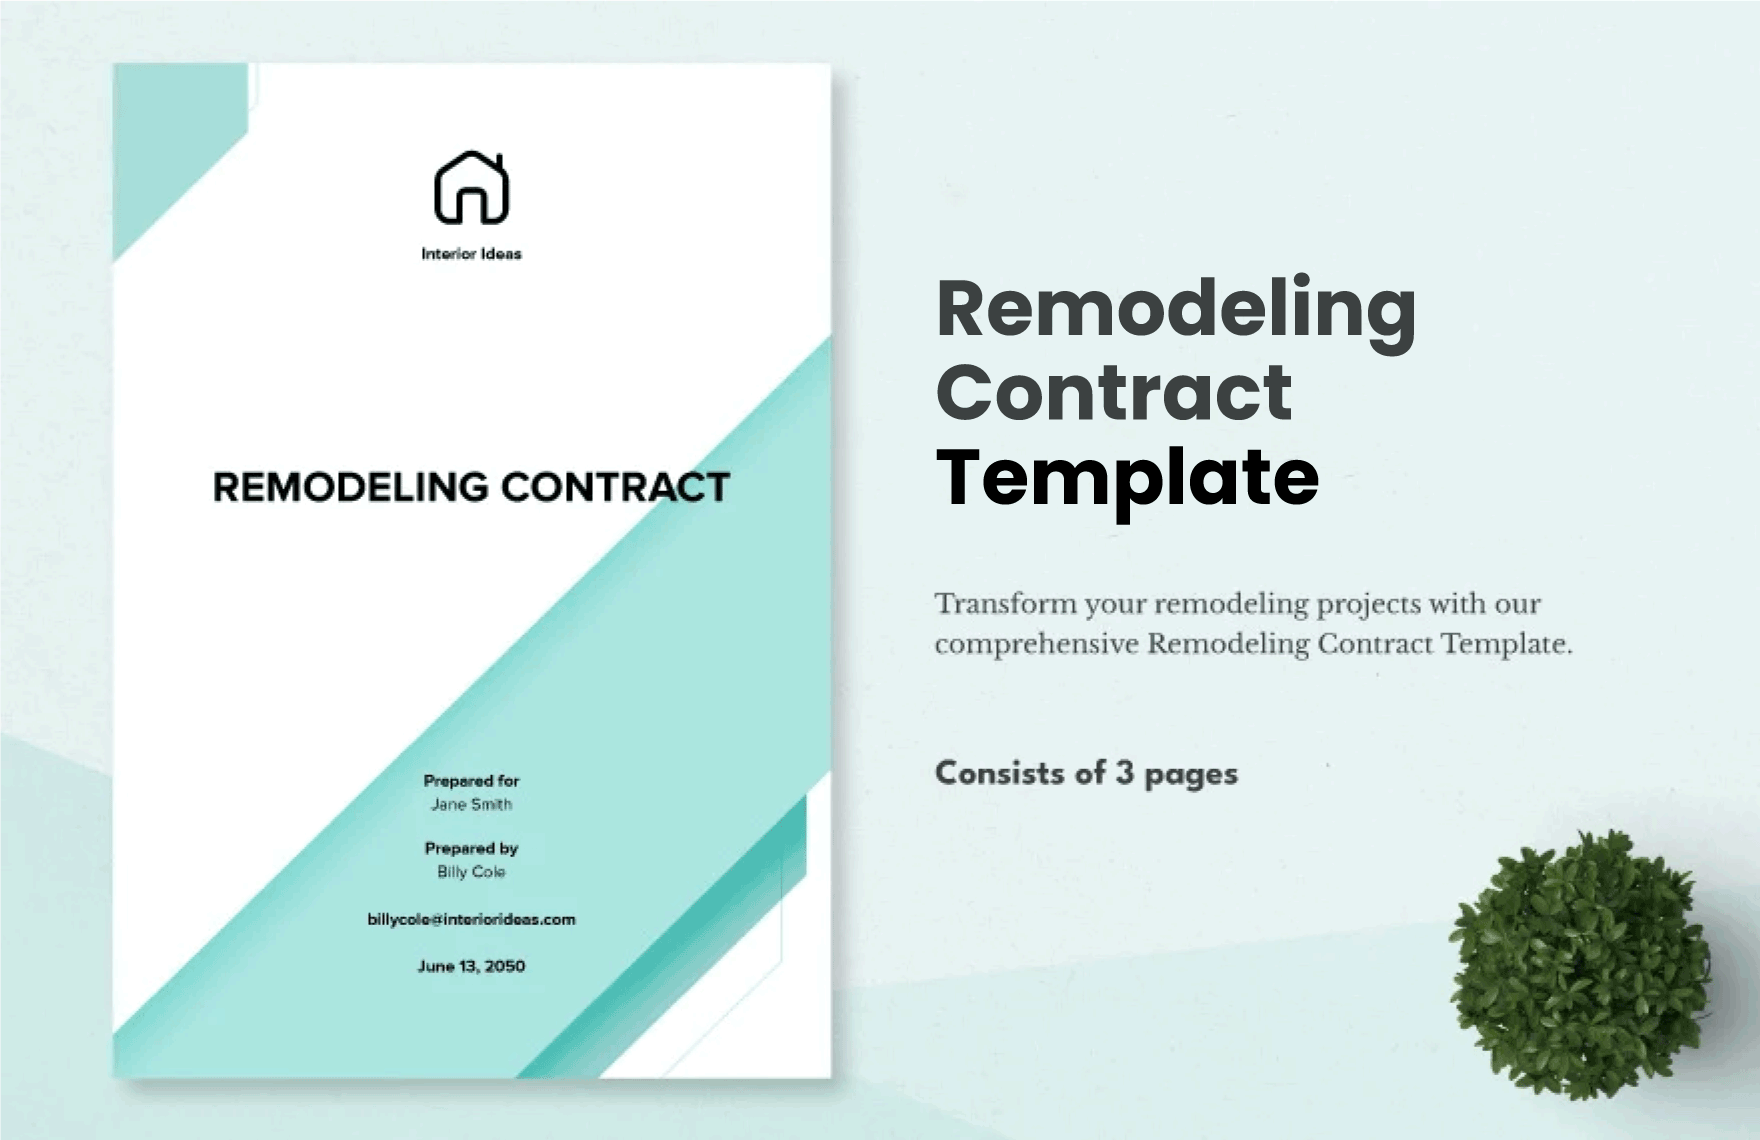 Remodeling Contract Template in Word, Google Docs, Apple Pages